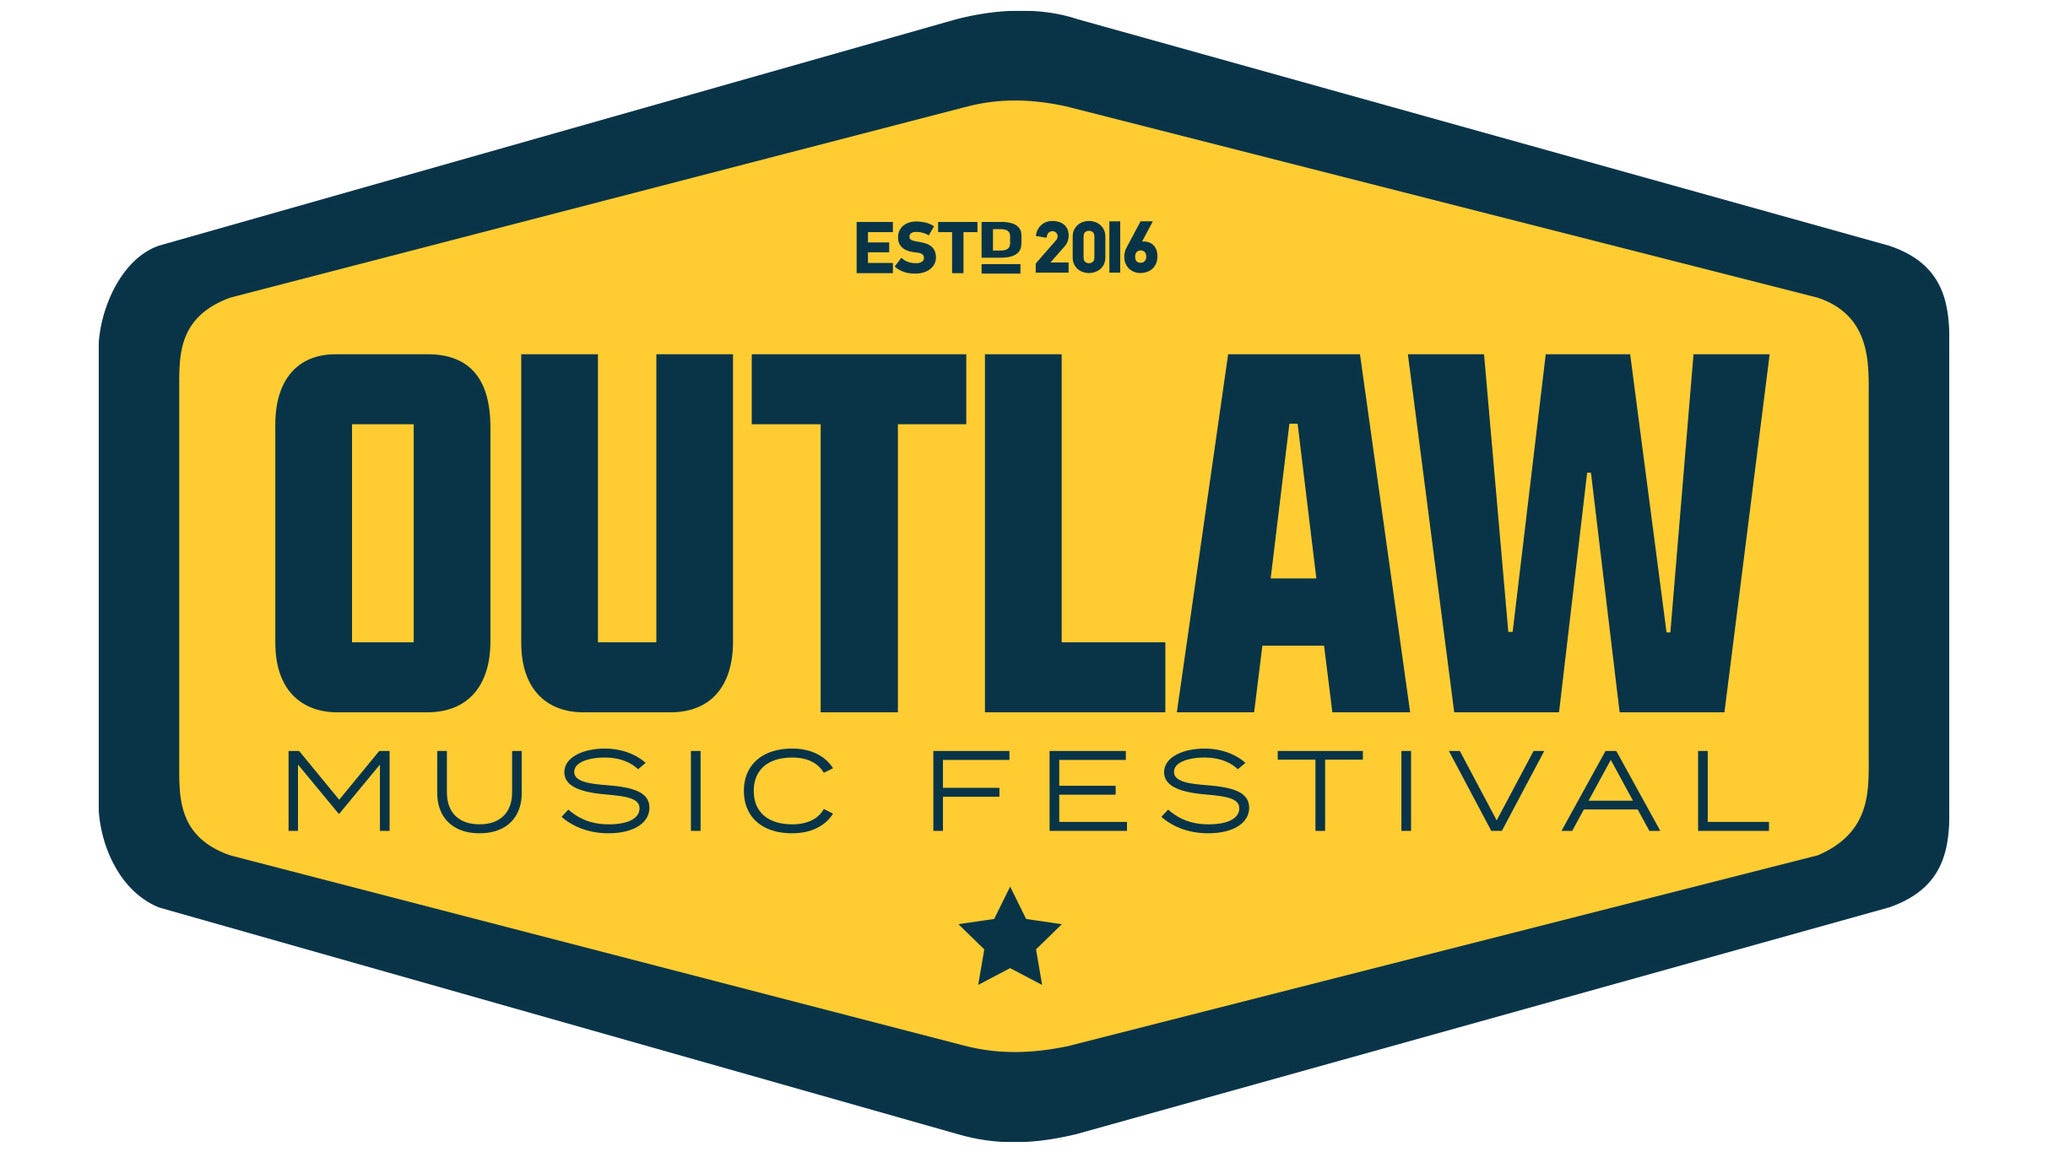 Outlaw ft: Willie Nelson, The Avett Brothers, Black Pumas & More in Mountain View promo photo for Season presale offer code